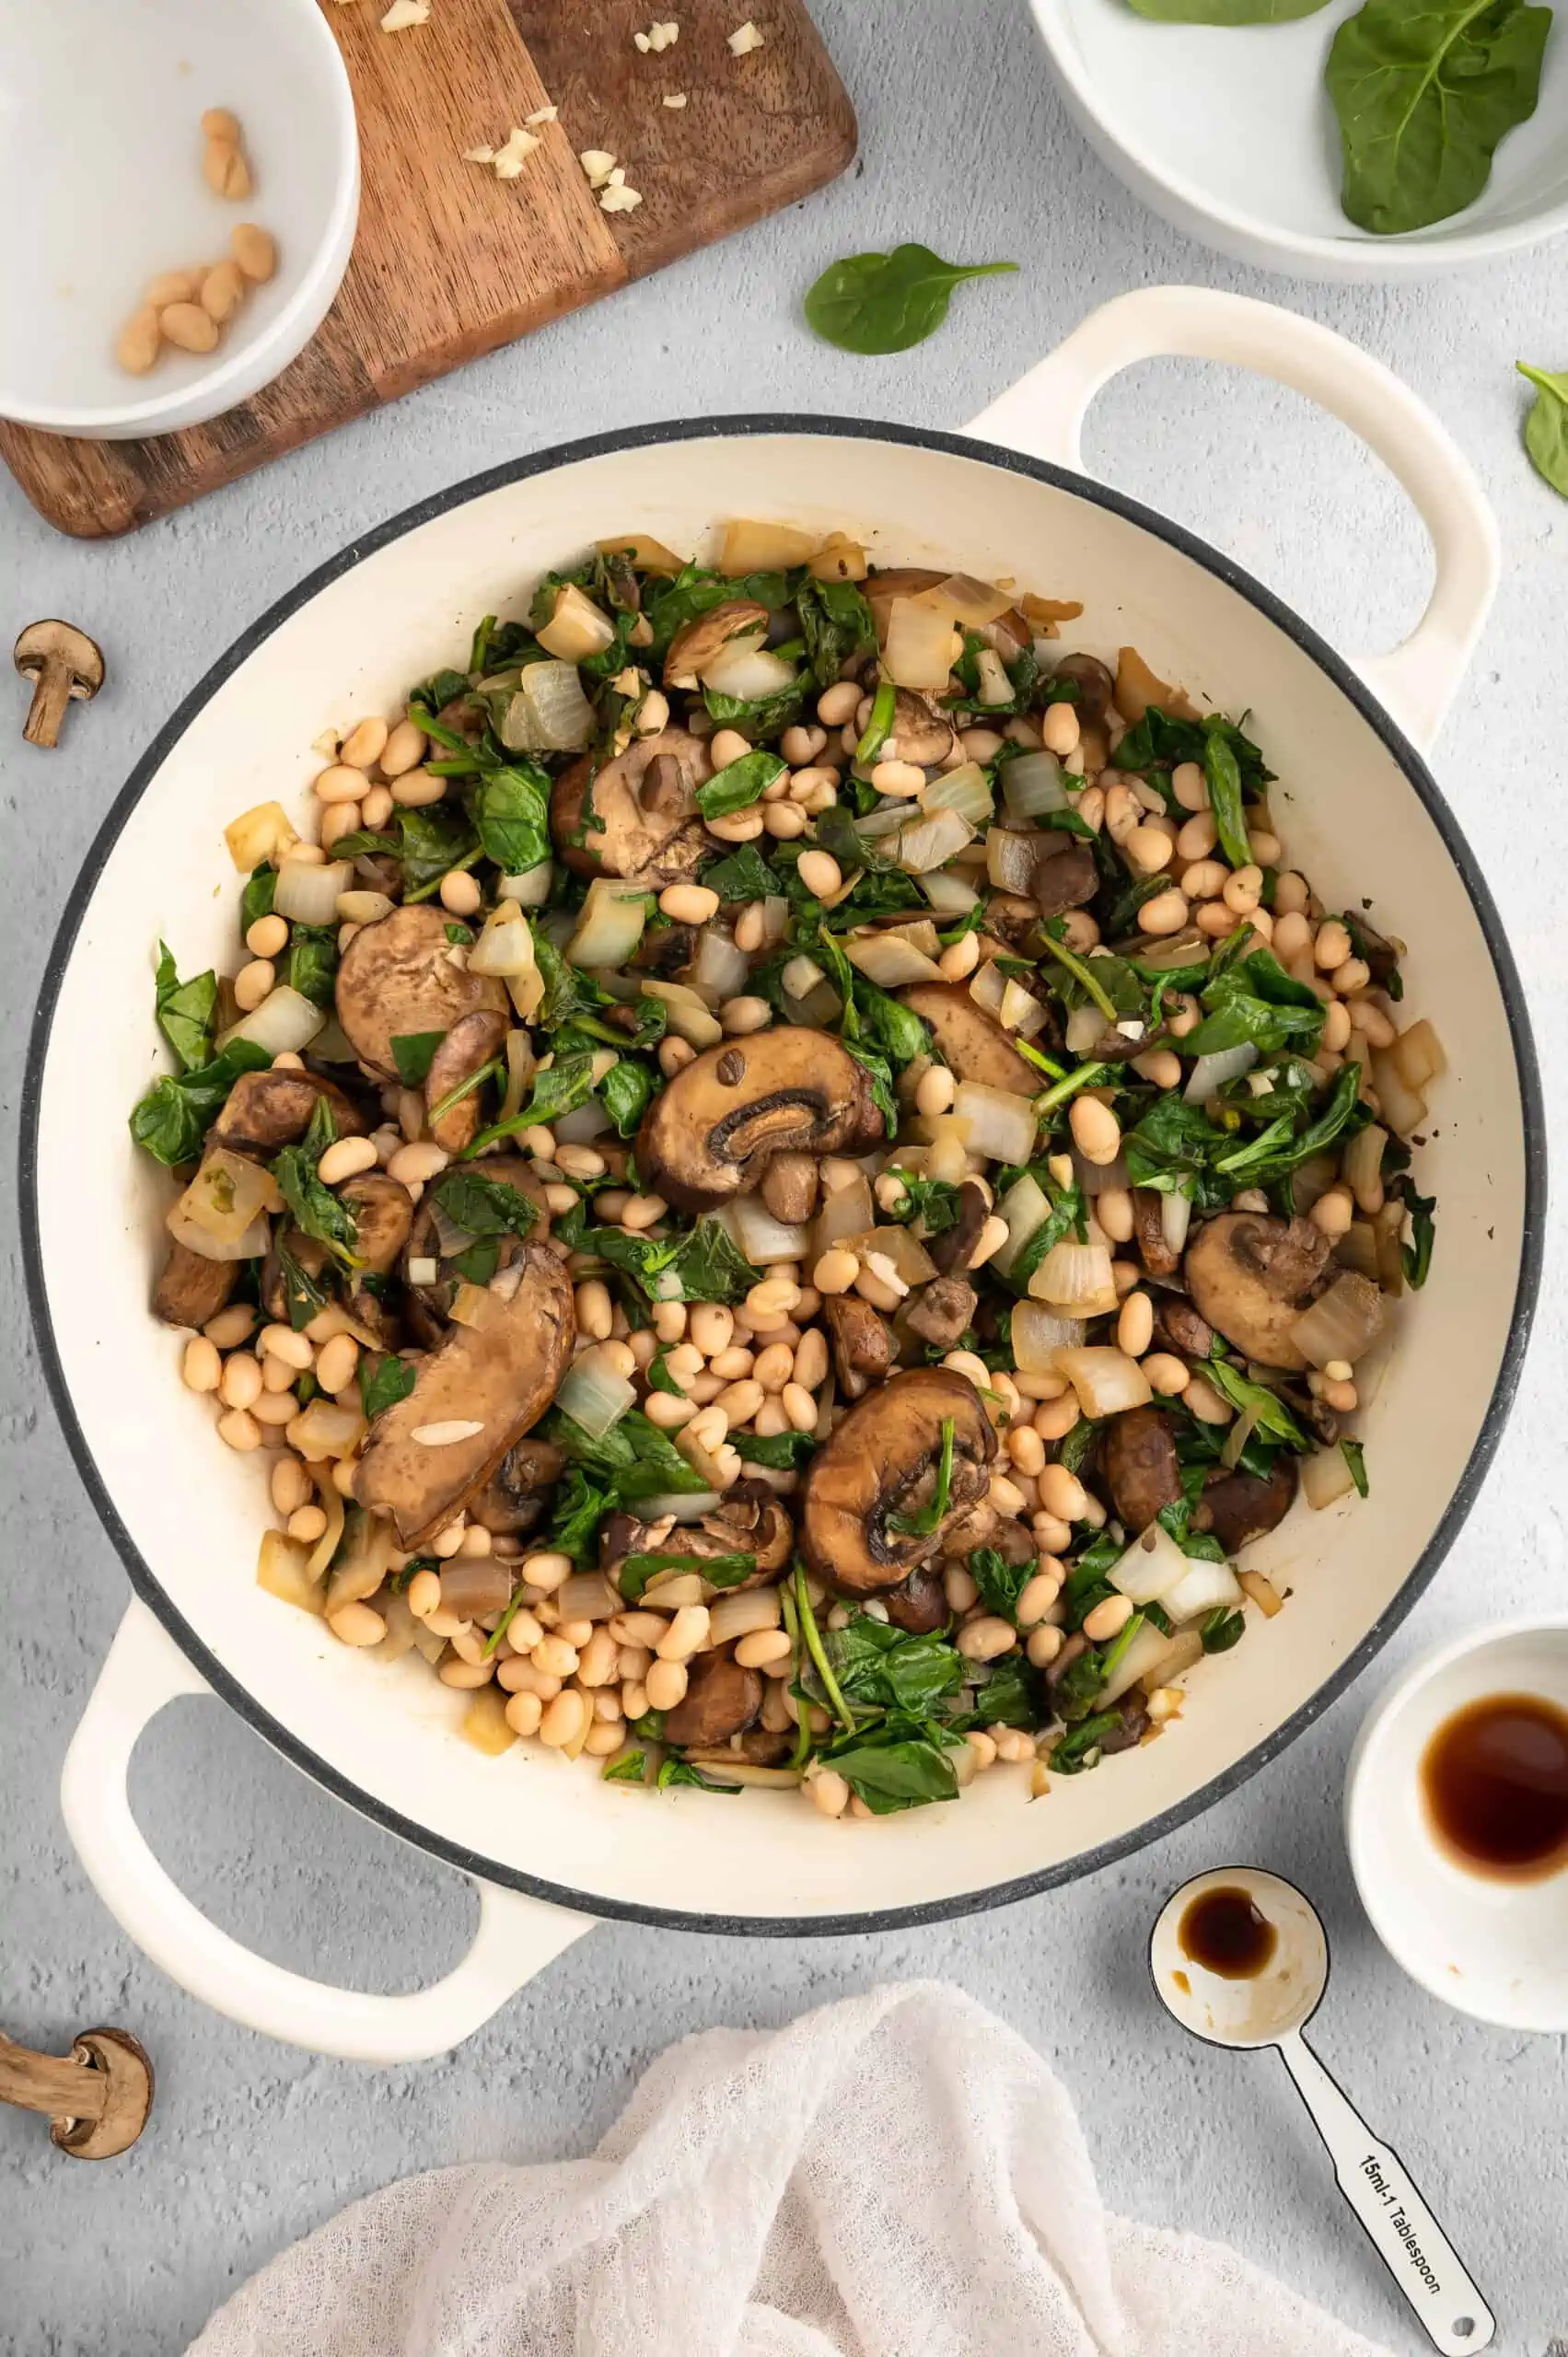 A pot with mushrooms, greens, and navy beans.